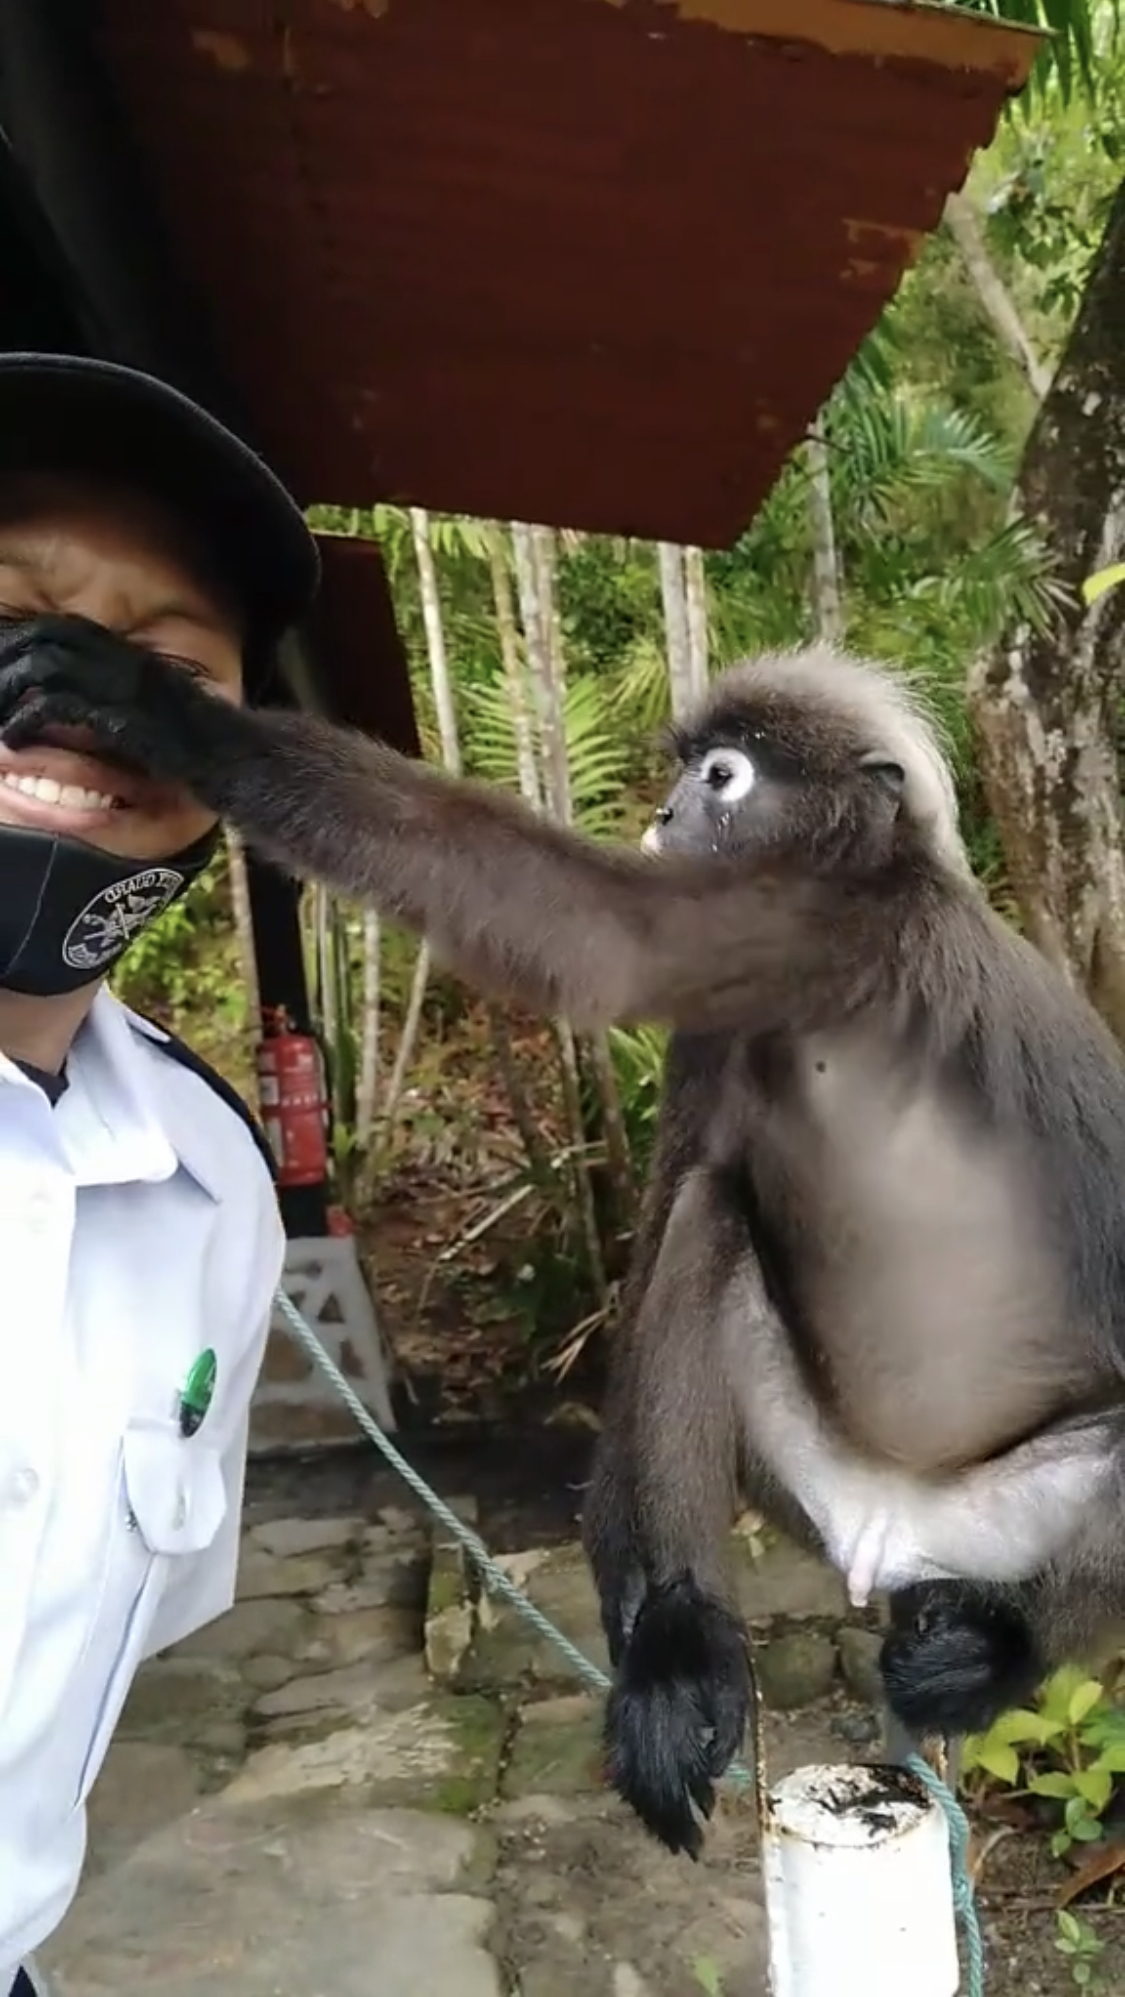 [video] security guard’s encounter with cheeky dusky leaf monkey goes viral online